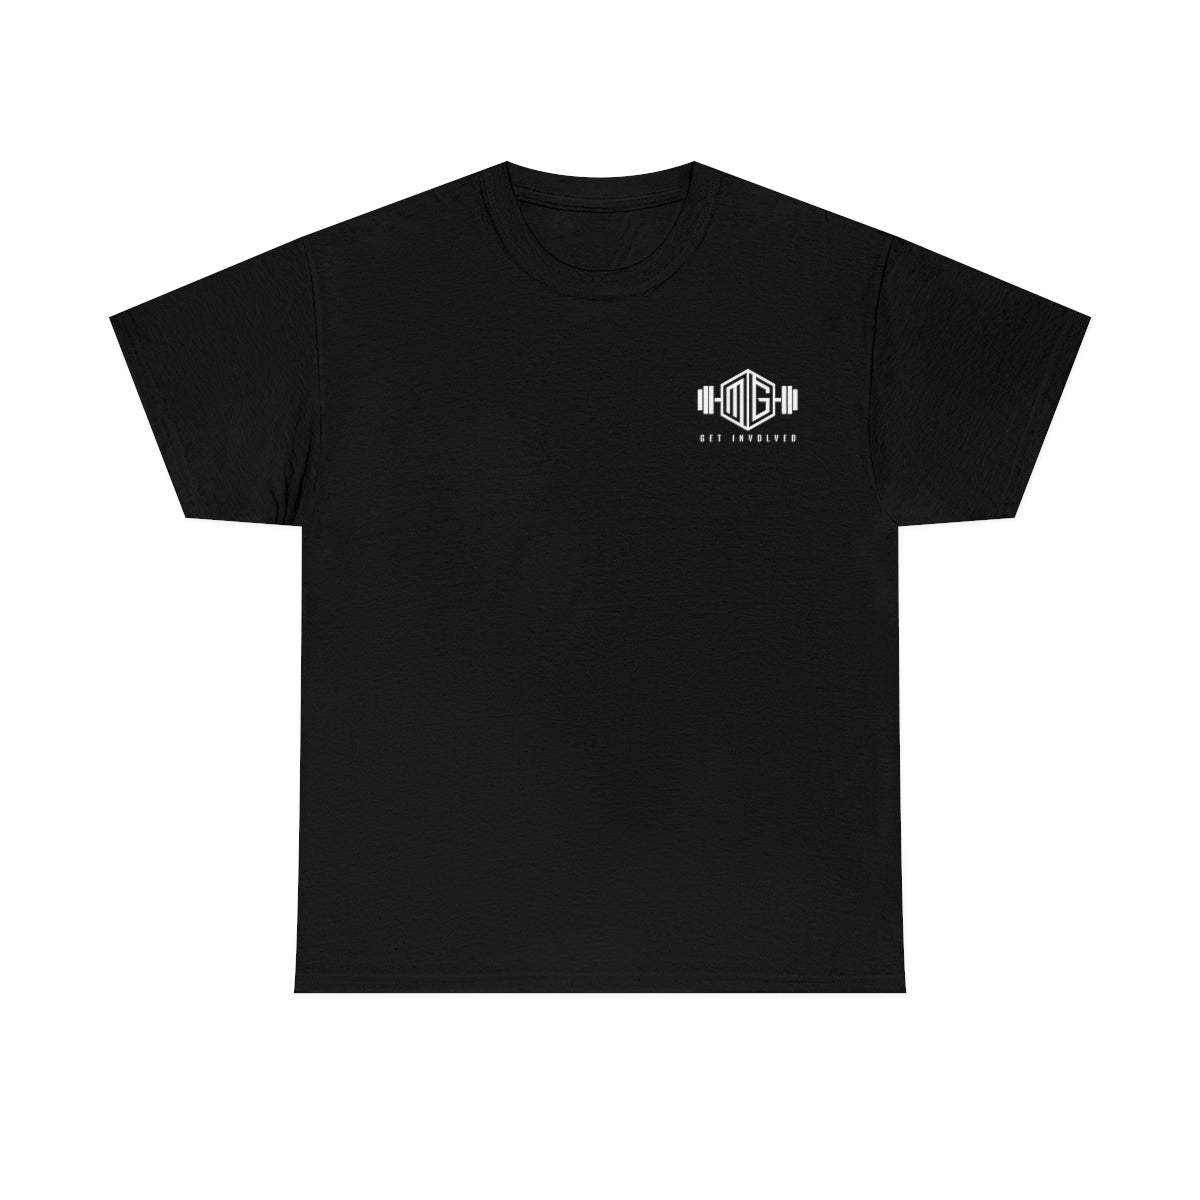 Michael Glynos "MG" Double Sided Tee